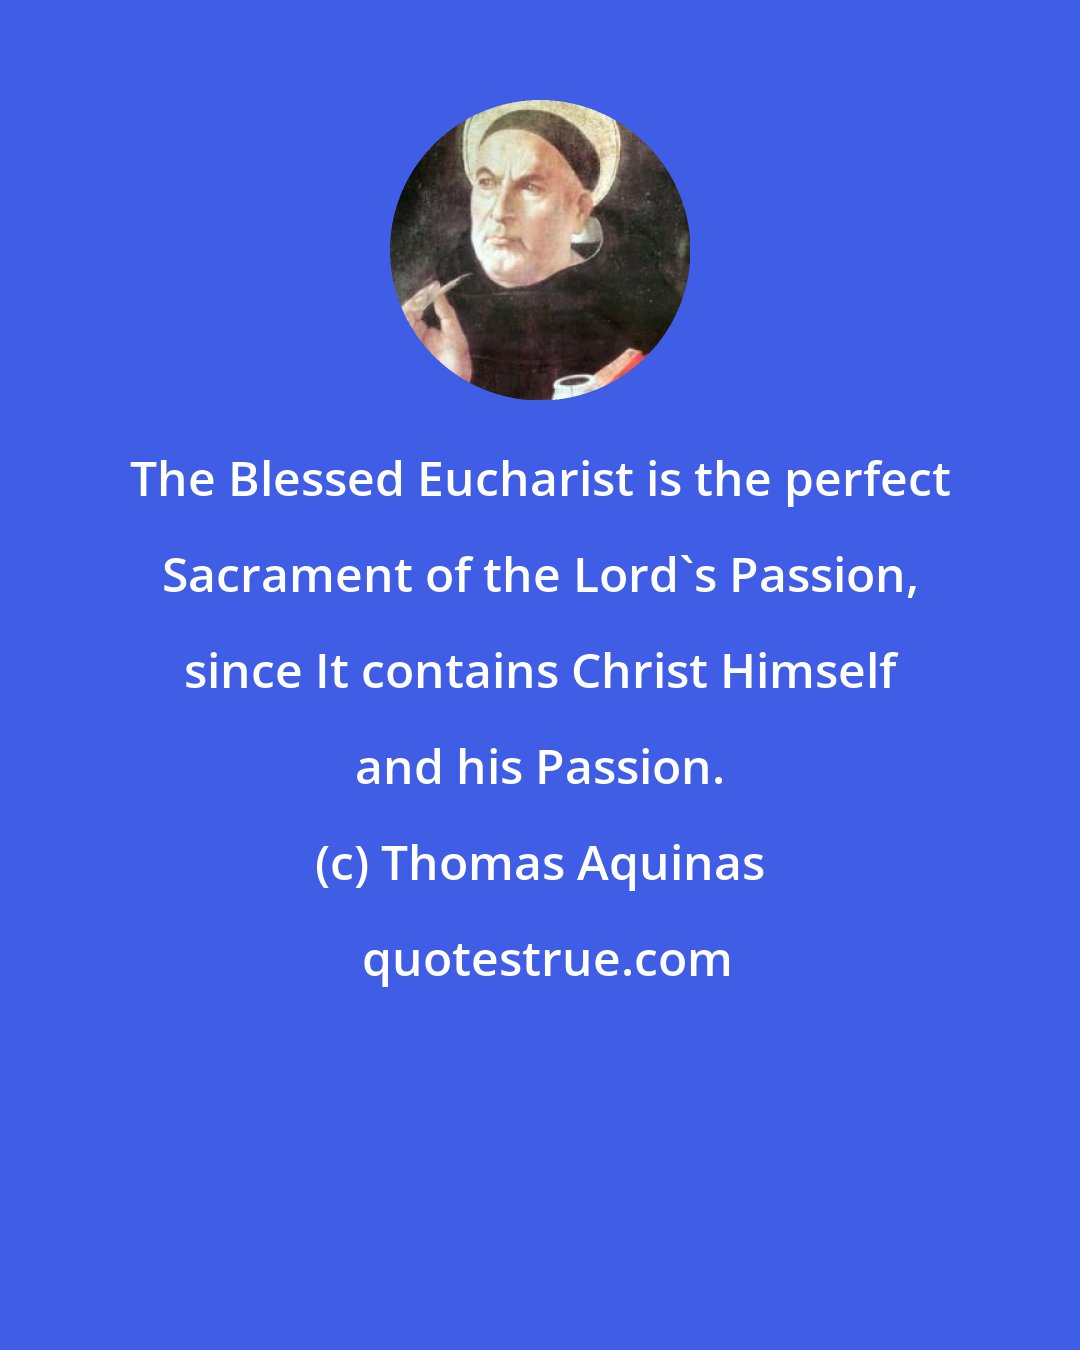 Thomas Aquinas: The Blessed Eucharist is the perfect Sacrament of the Lord's Passion, since It contains Christ Himself and his Passion.